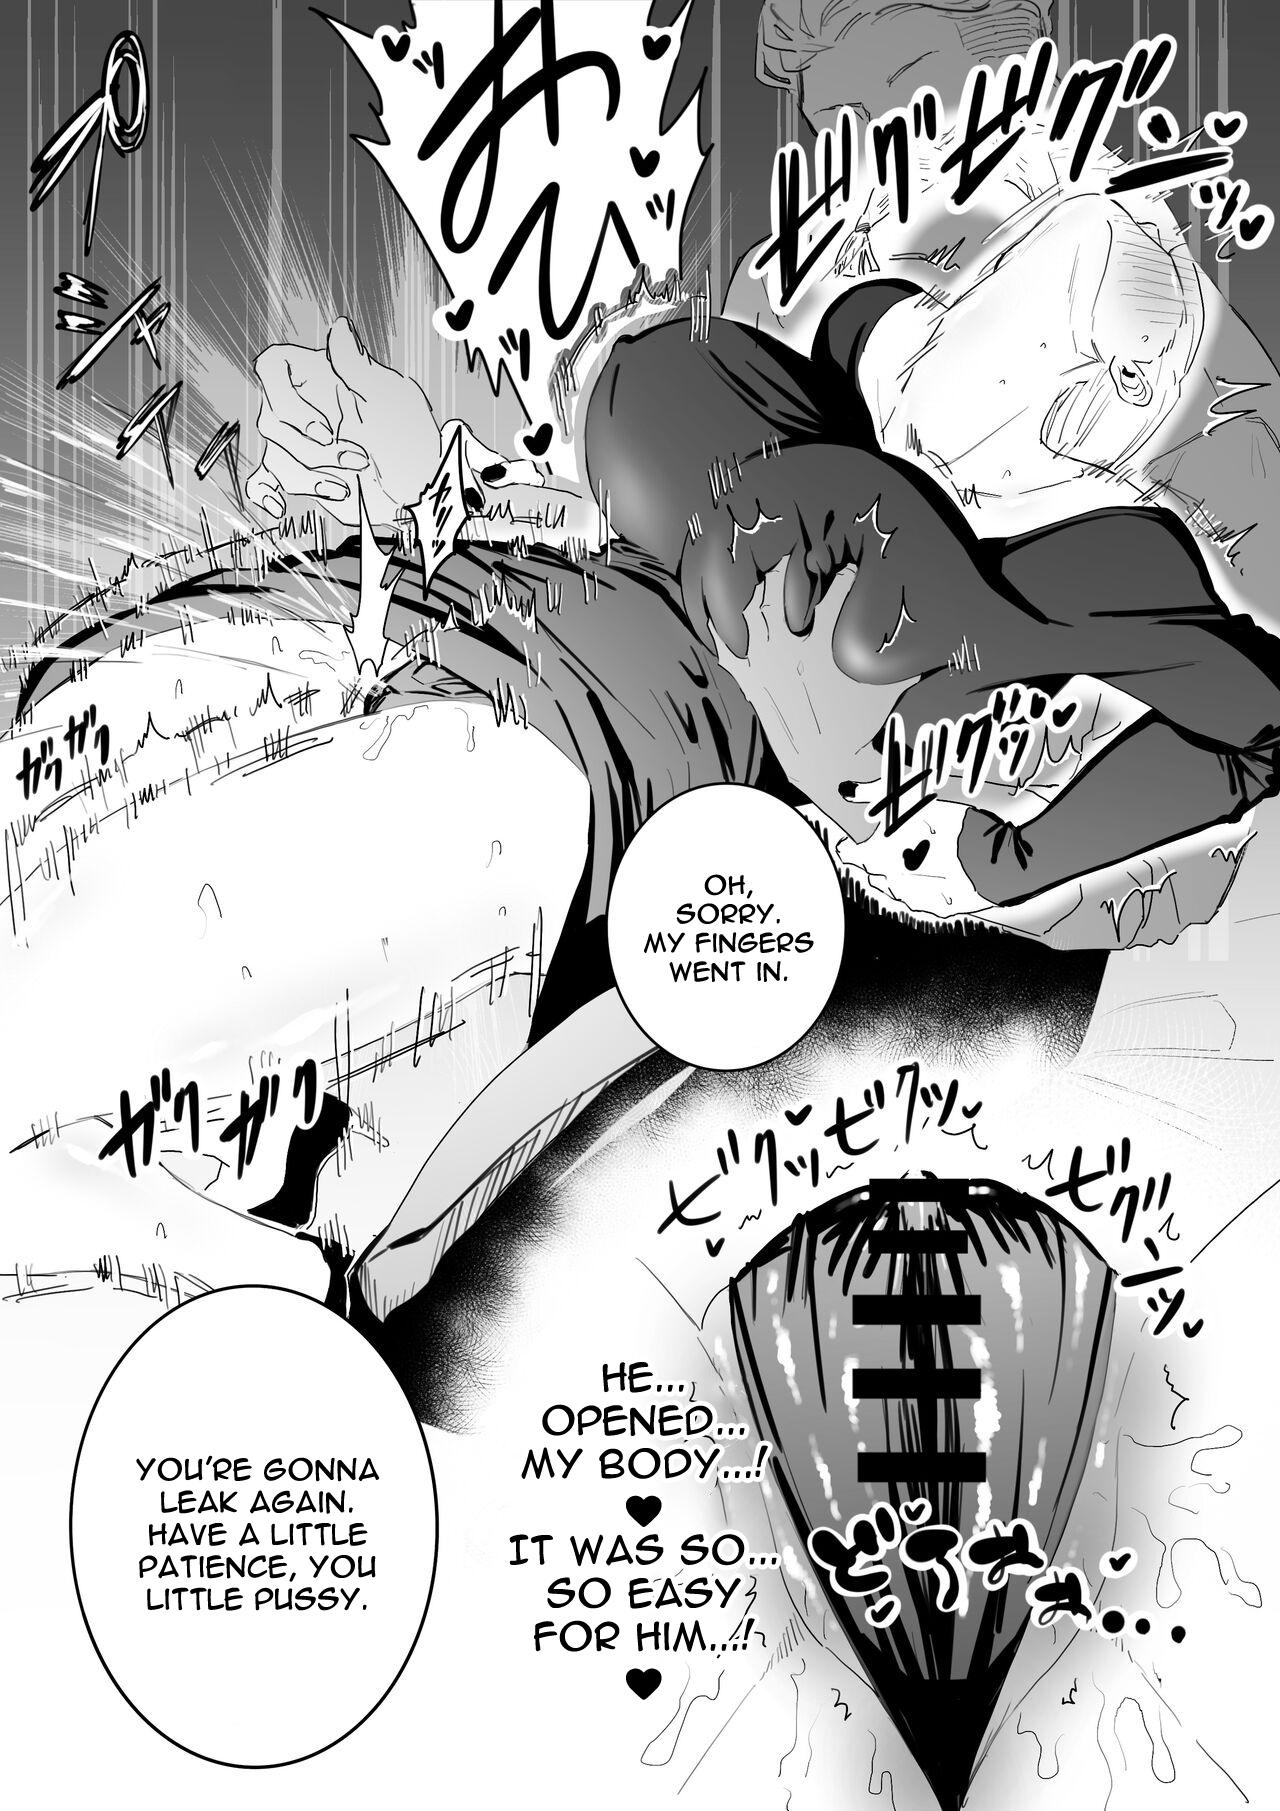 Chicks The picked up Meimei just becomes a za*n tank. - Jujutsu kaisen Hot - Page 6